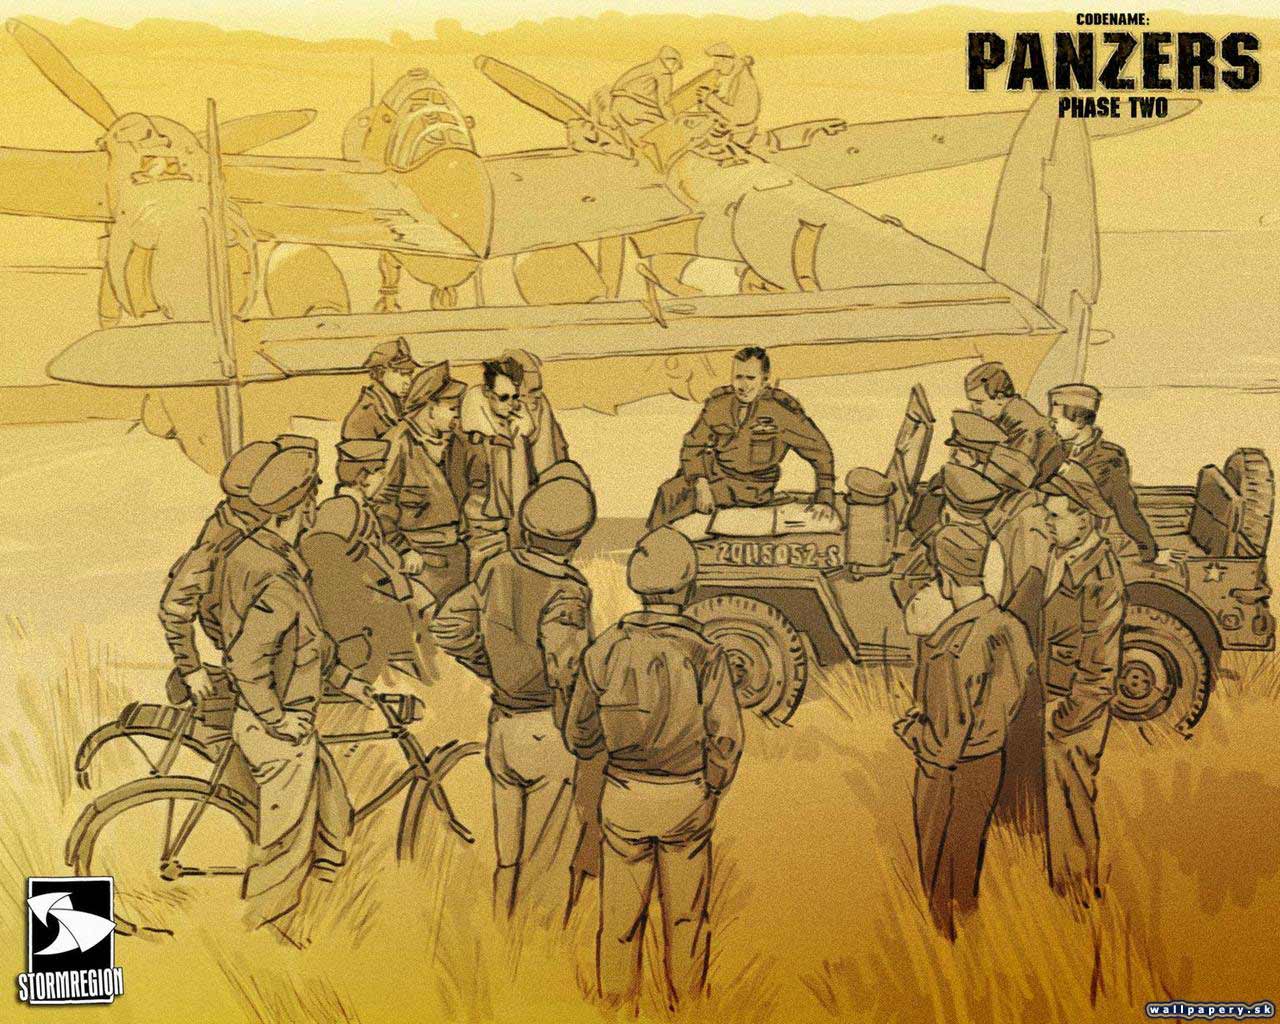 Codename: Panzers Phase Two - wallpaper 7